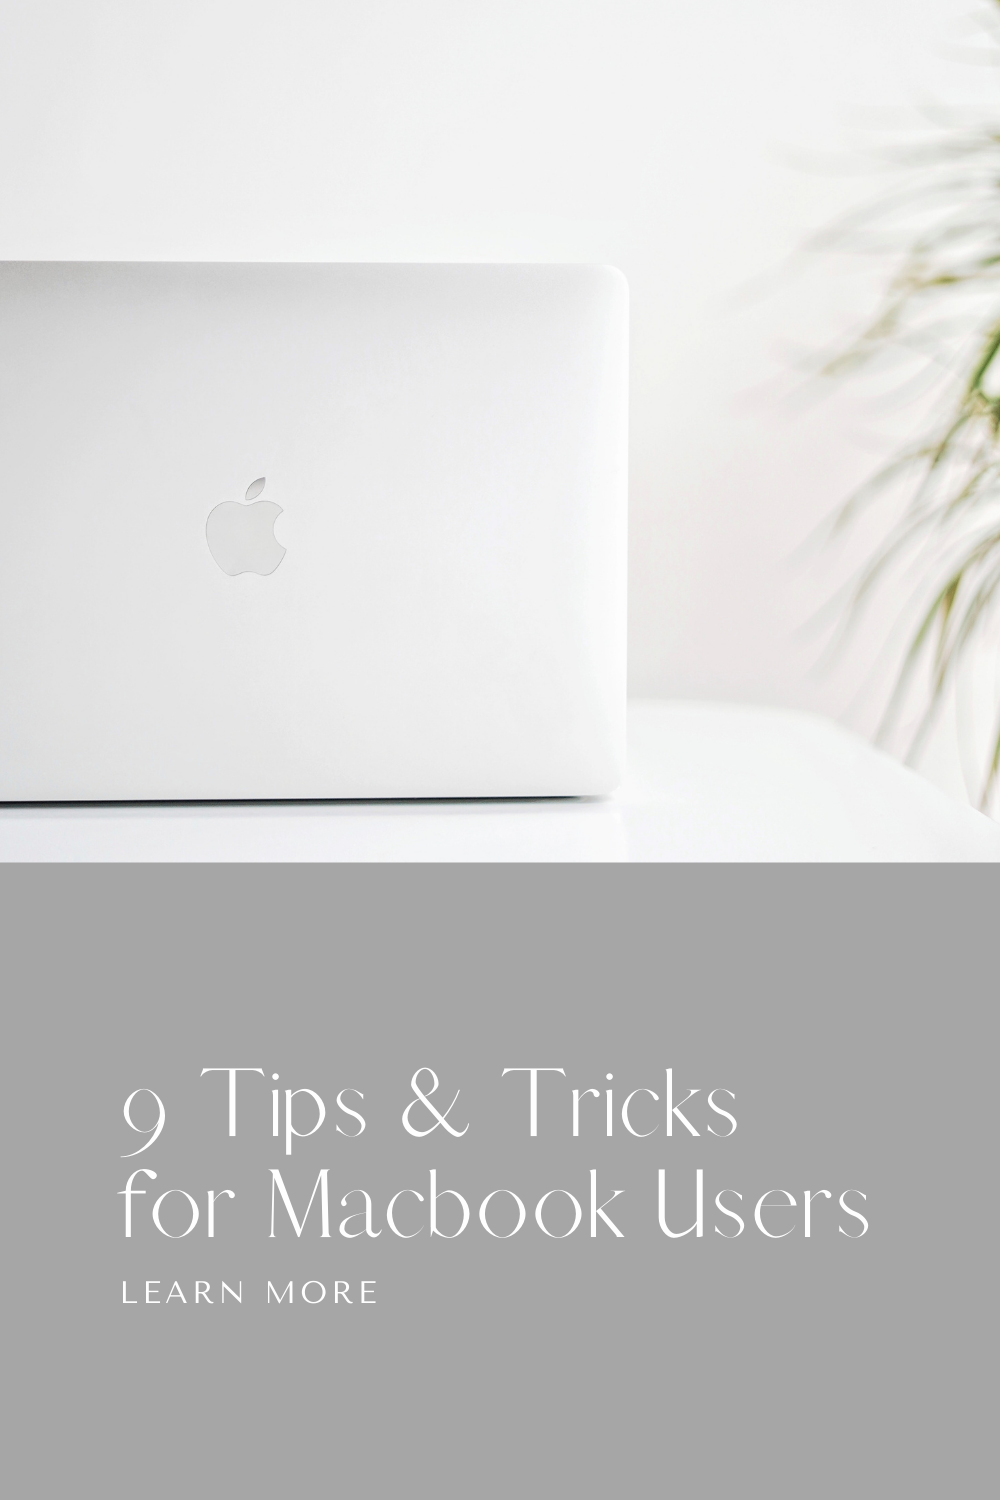 A silver Macbook sits on a white table and green plant is in view. This article covers tips and tricks for Macbook users.